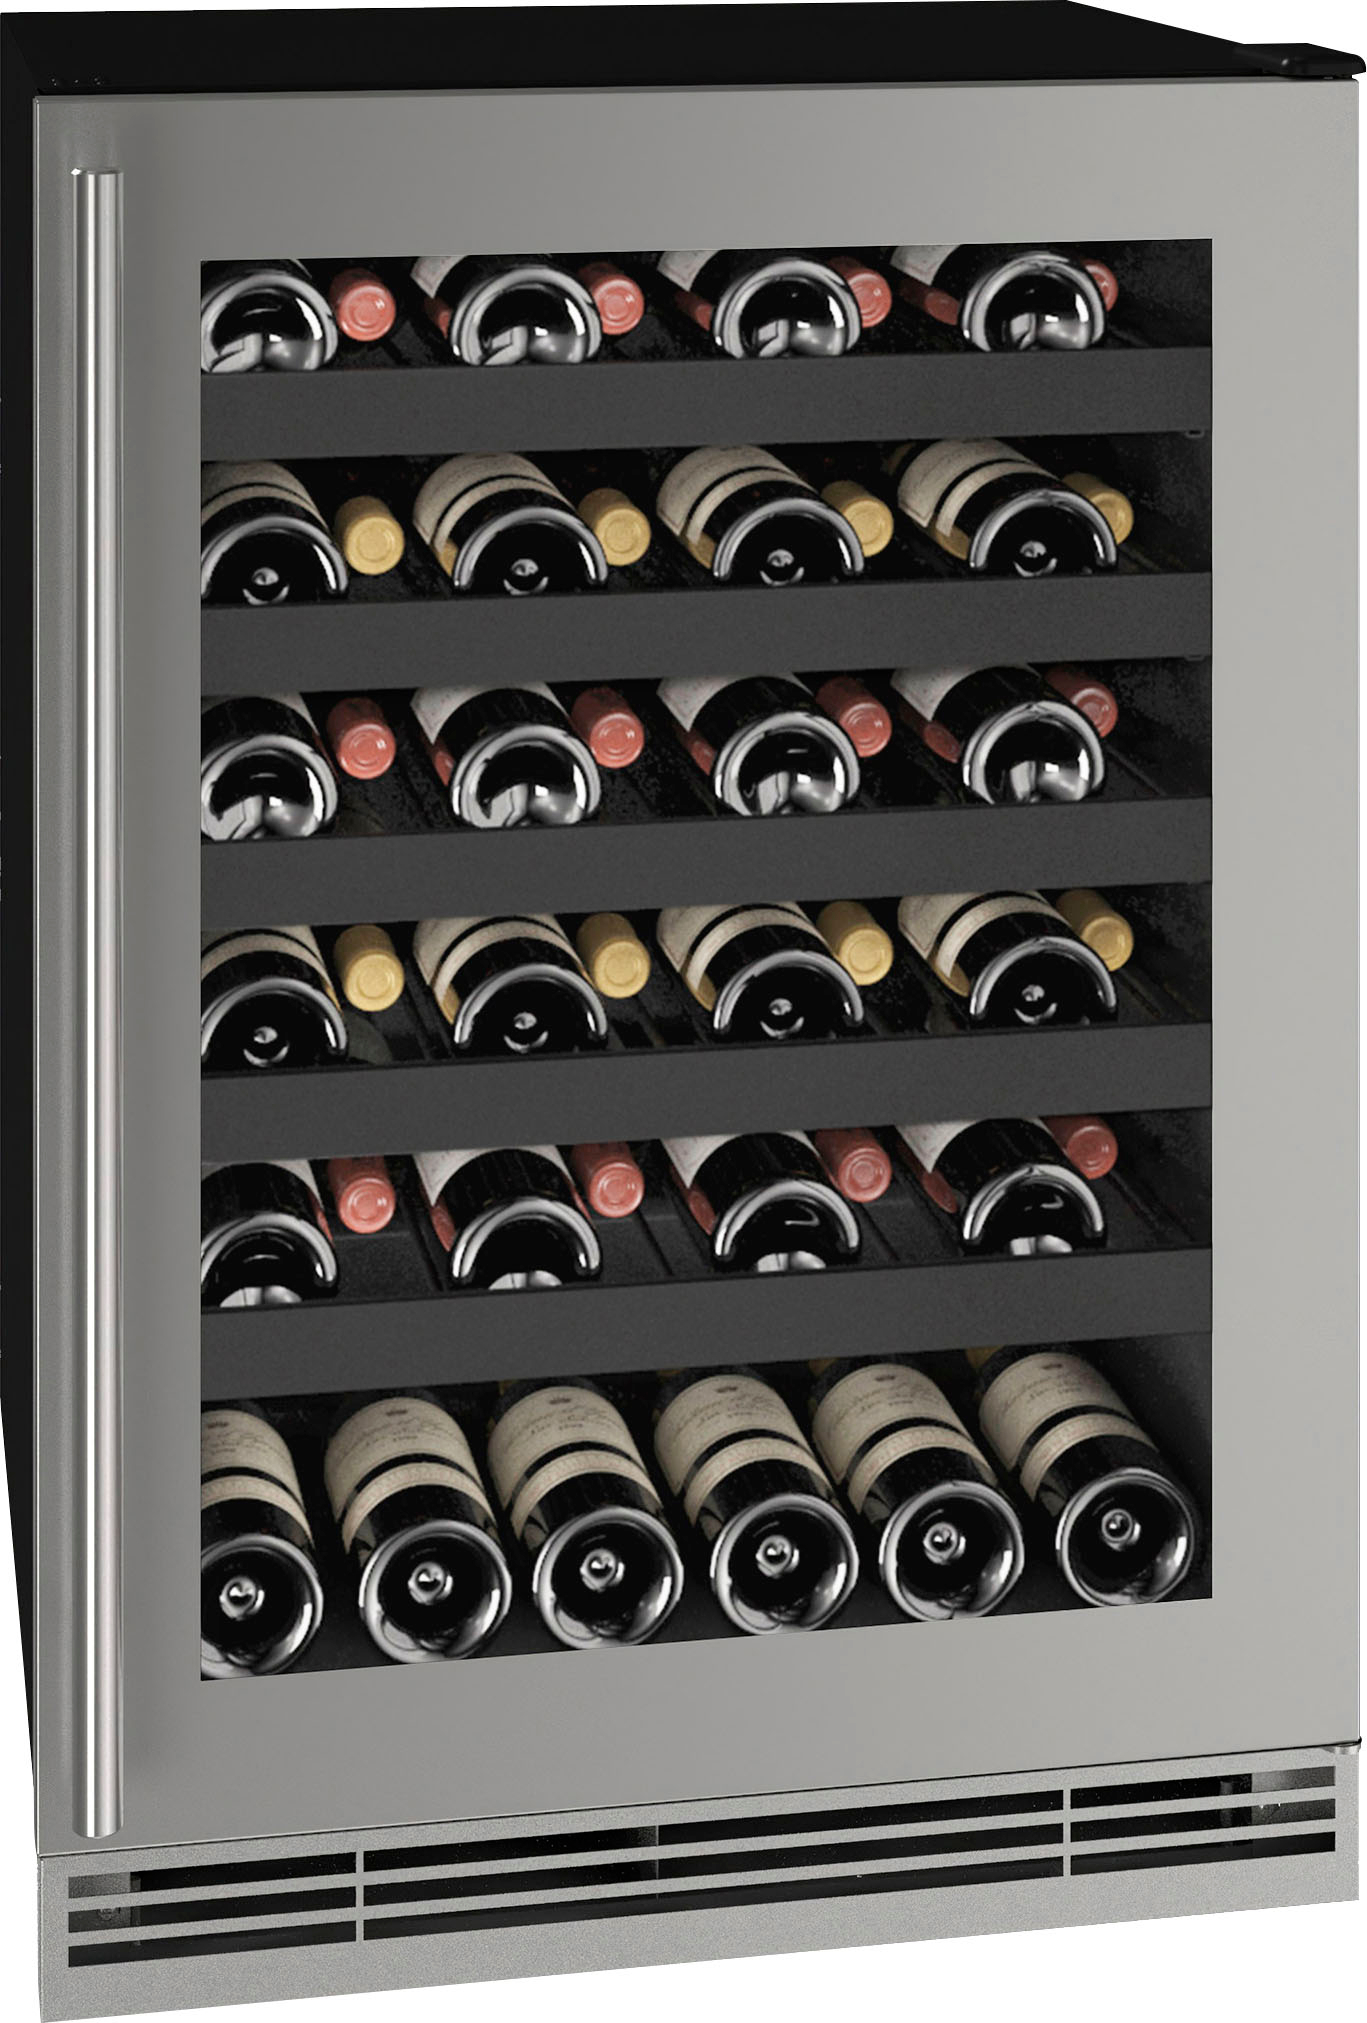 Angle View: U-Line - 5.5 cu ft 48-750ml bottle Wine Refrigerator - Stainless steel